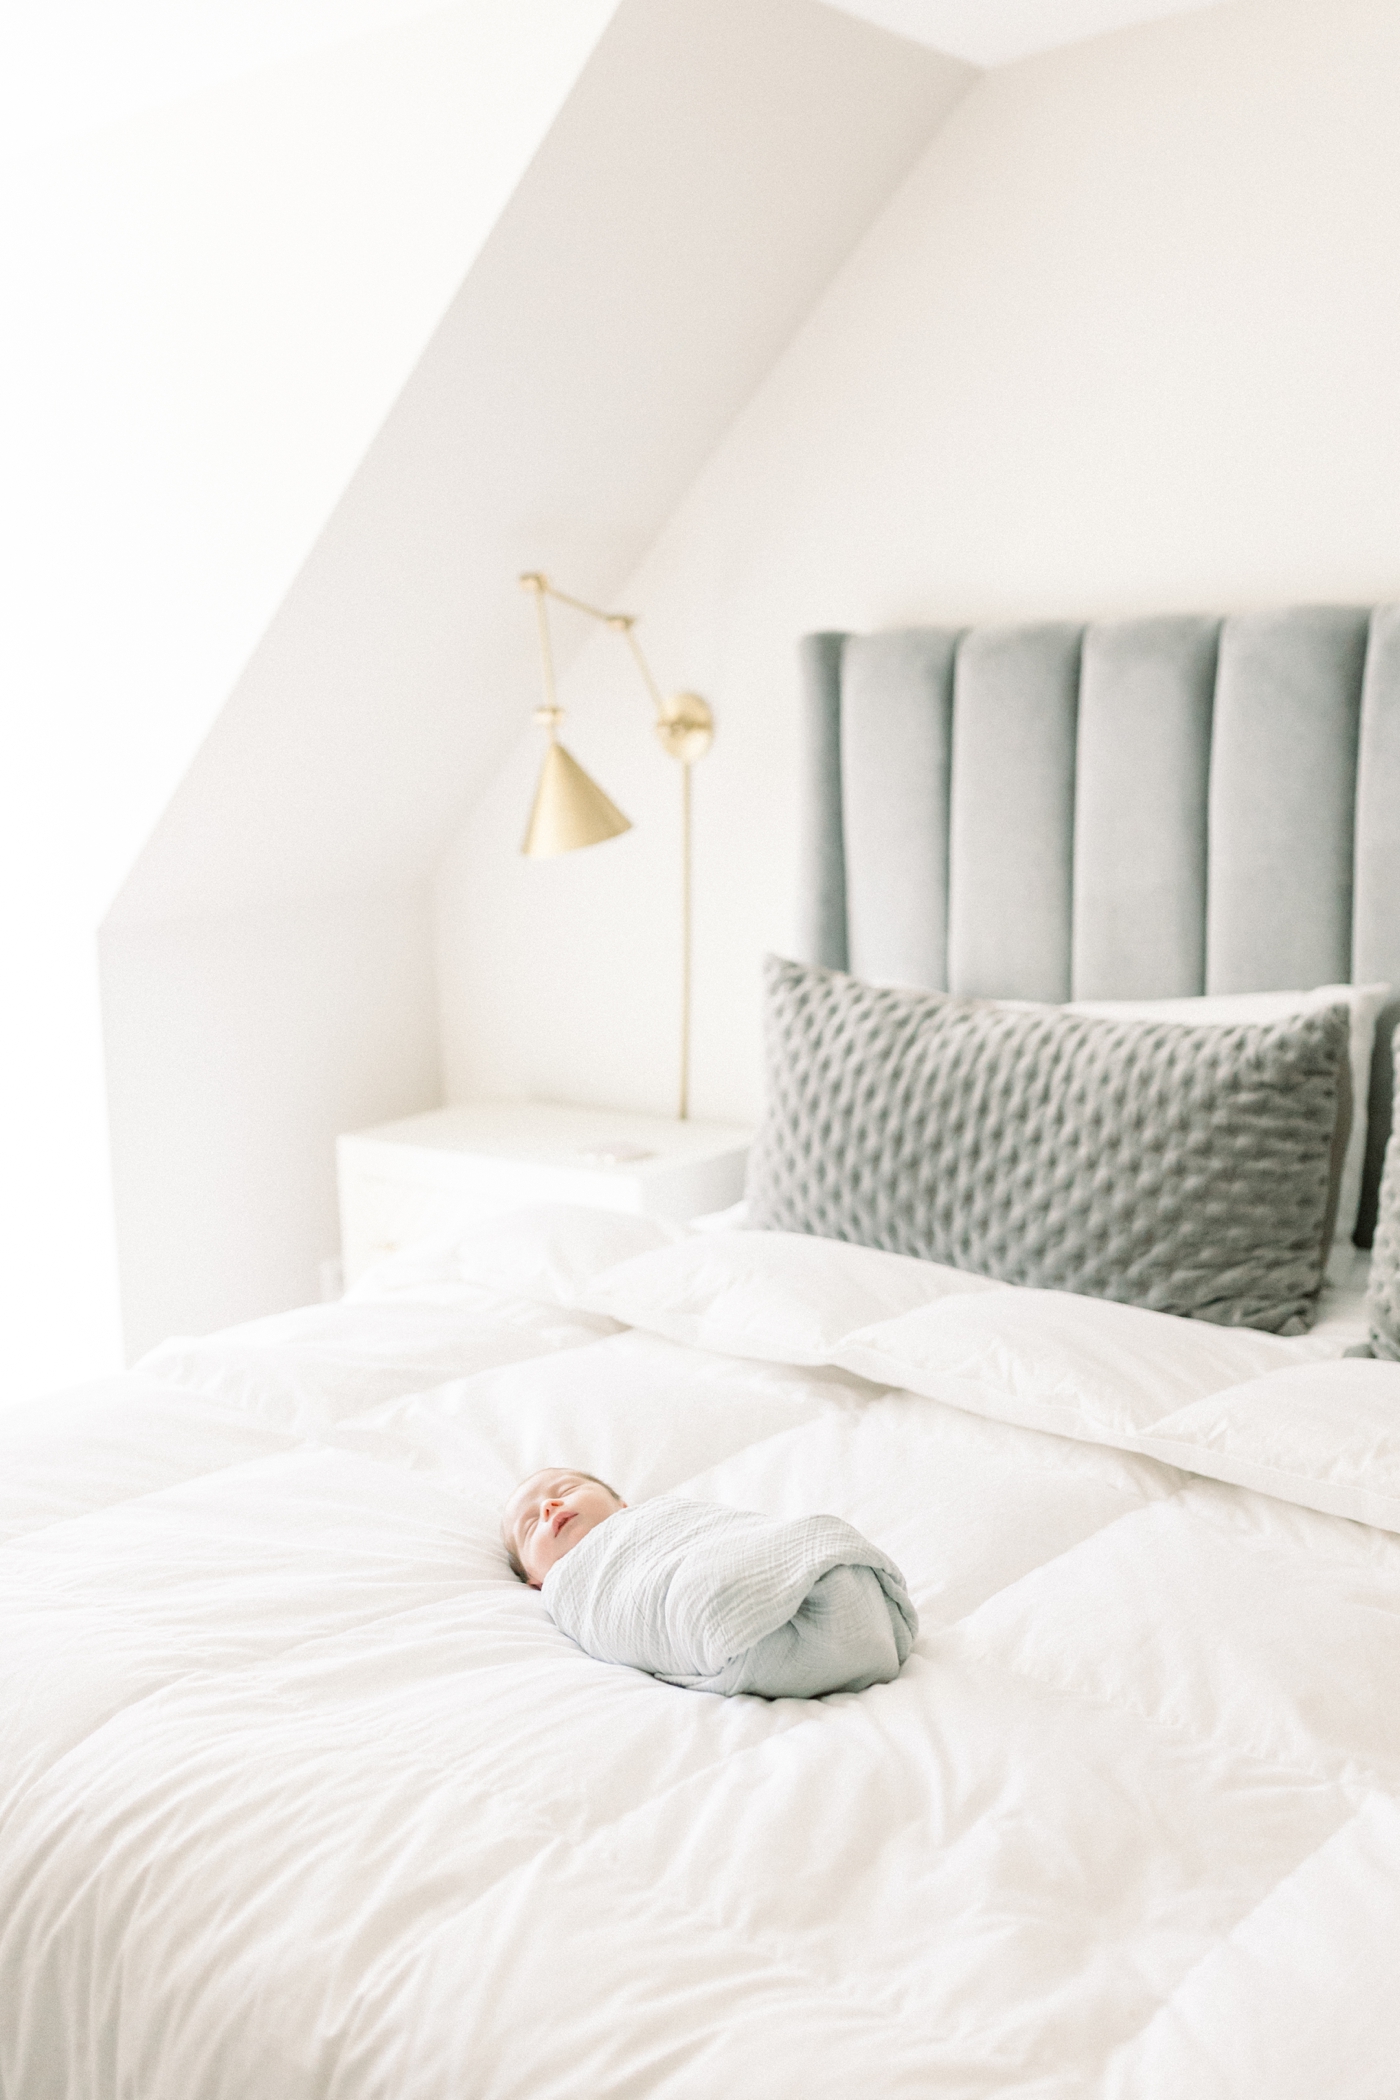 Newborn baby laying on a bed with a gray headboard | Photo by Caitlyn Motycka